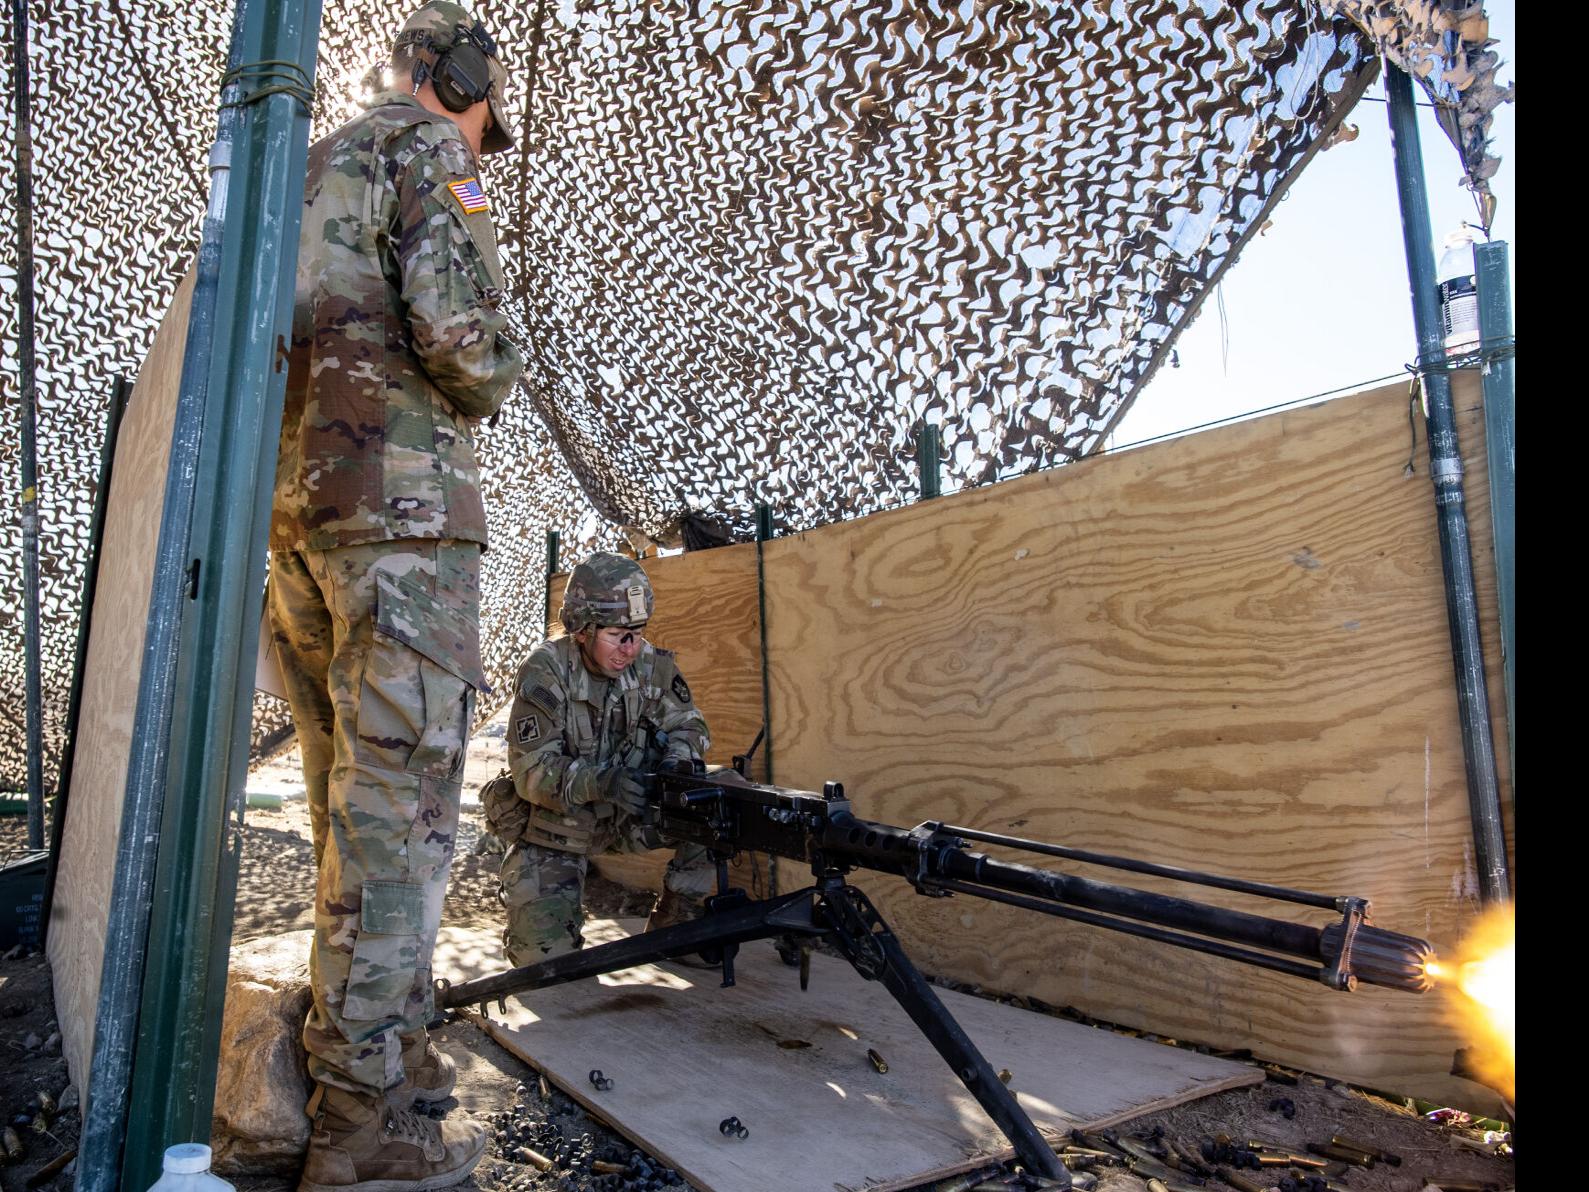 Soldiers earn Expert Field Medical Badge in second event by Army